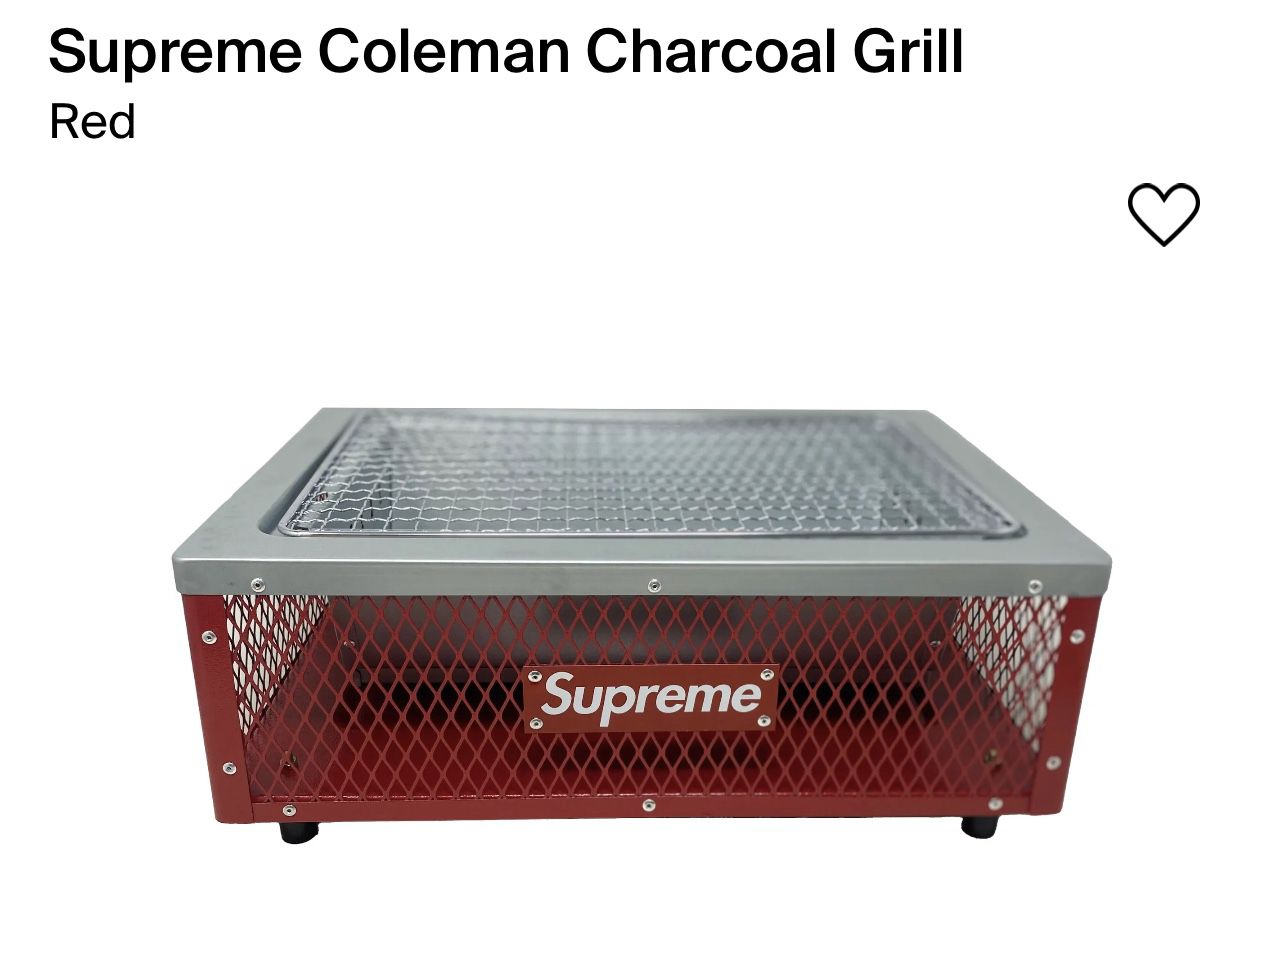 Supreme Coleman Charcoal Grill for Sale in La Habra Heights, CA - OfferUp